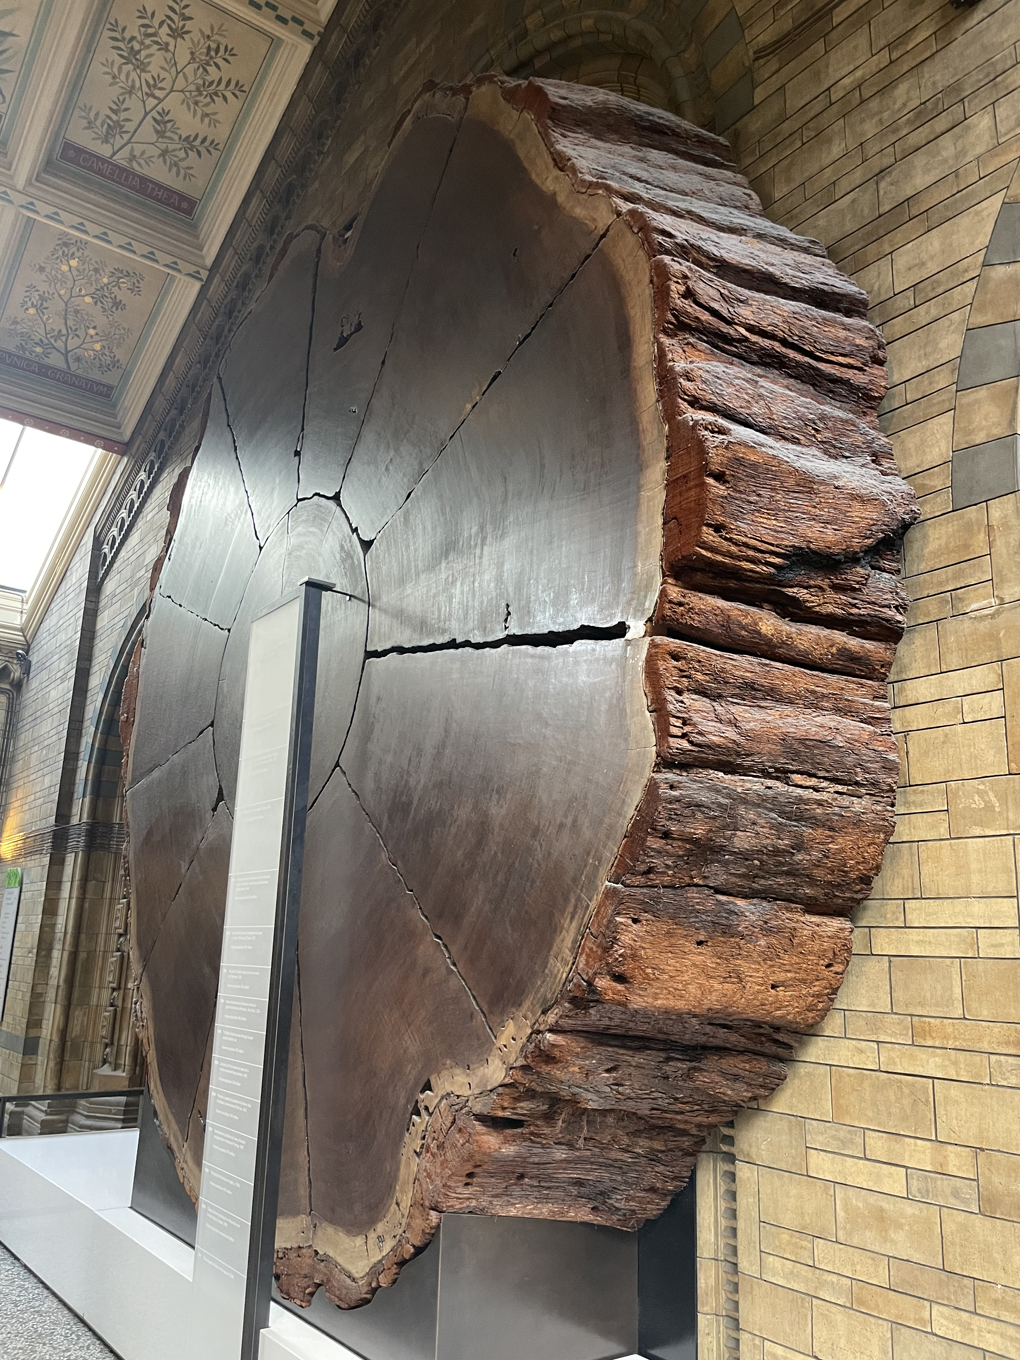 Grand sequoia on display at the natural history museum